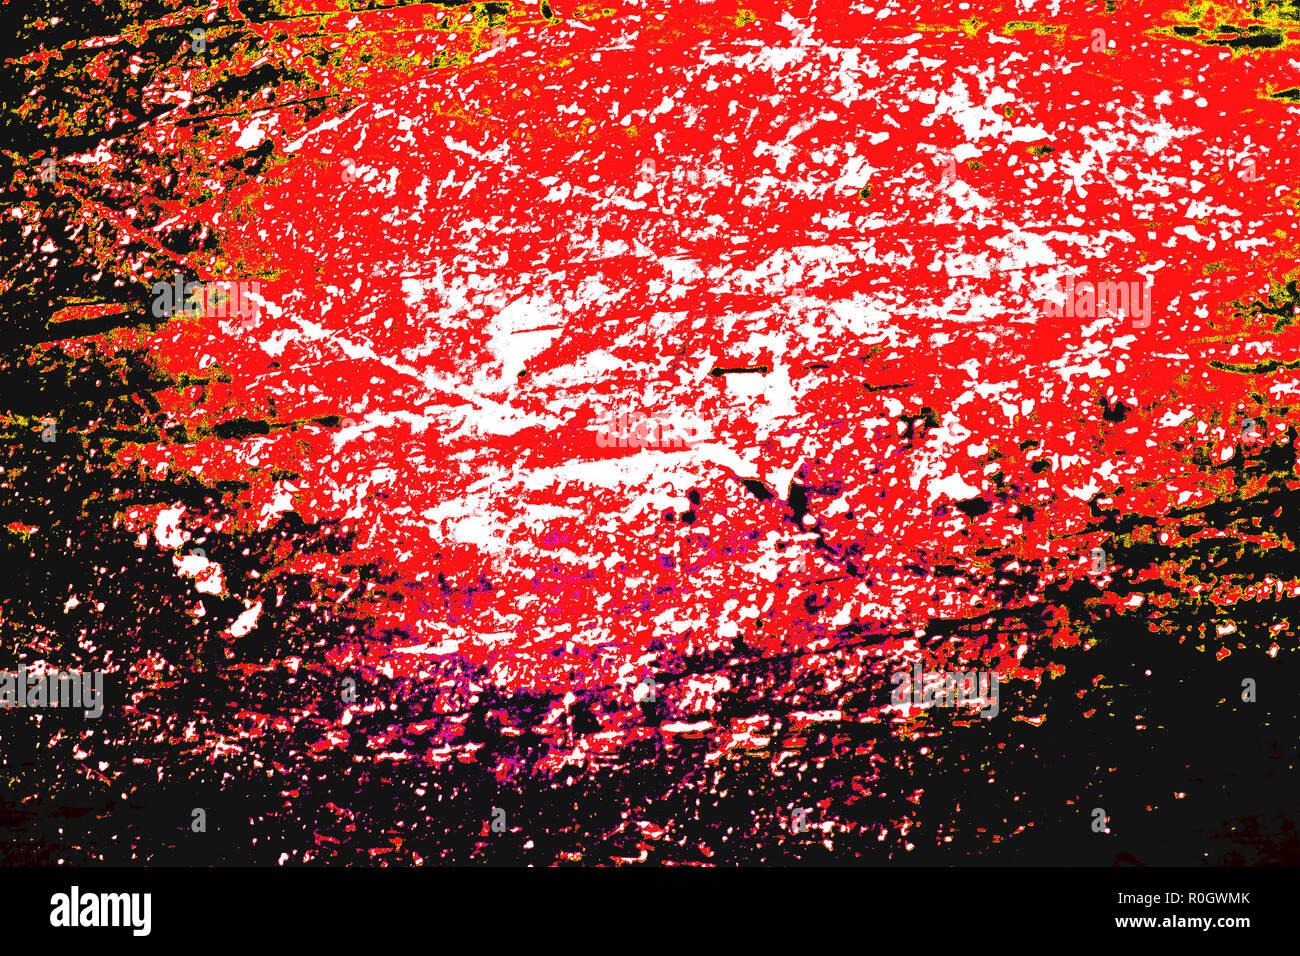 Trendy abstract shabby pixelated background in red tones with a lot of scratches Stock Photo